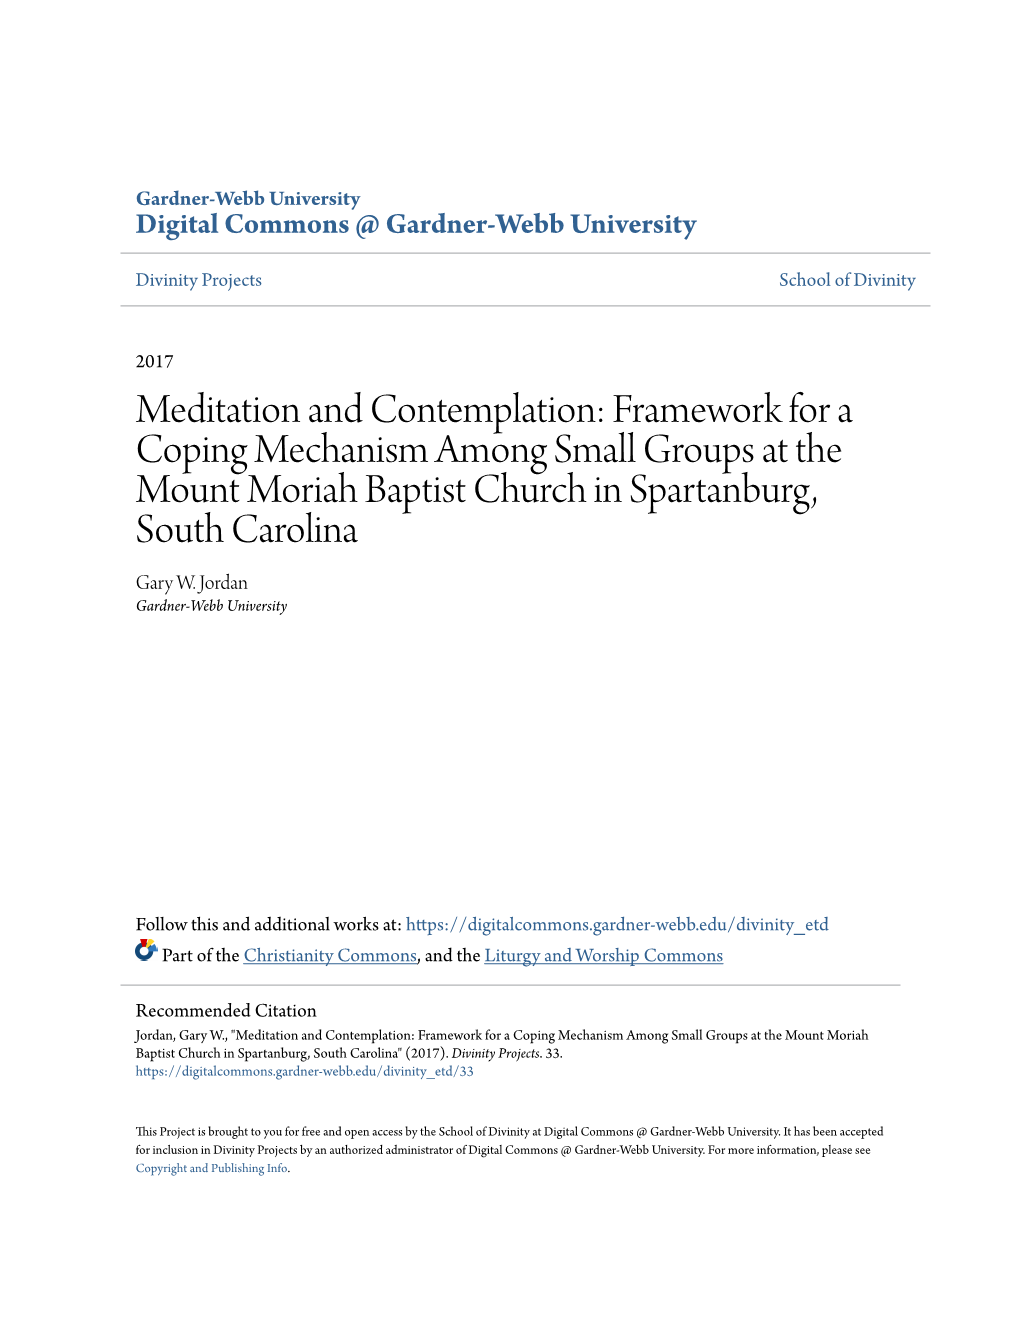 Meditation and Contemplation: Framework for a Coping Mechanism Among Small Groups at the Mount Moriah Baptist Church in Spartanburg, South Carolina Gary W